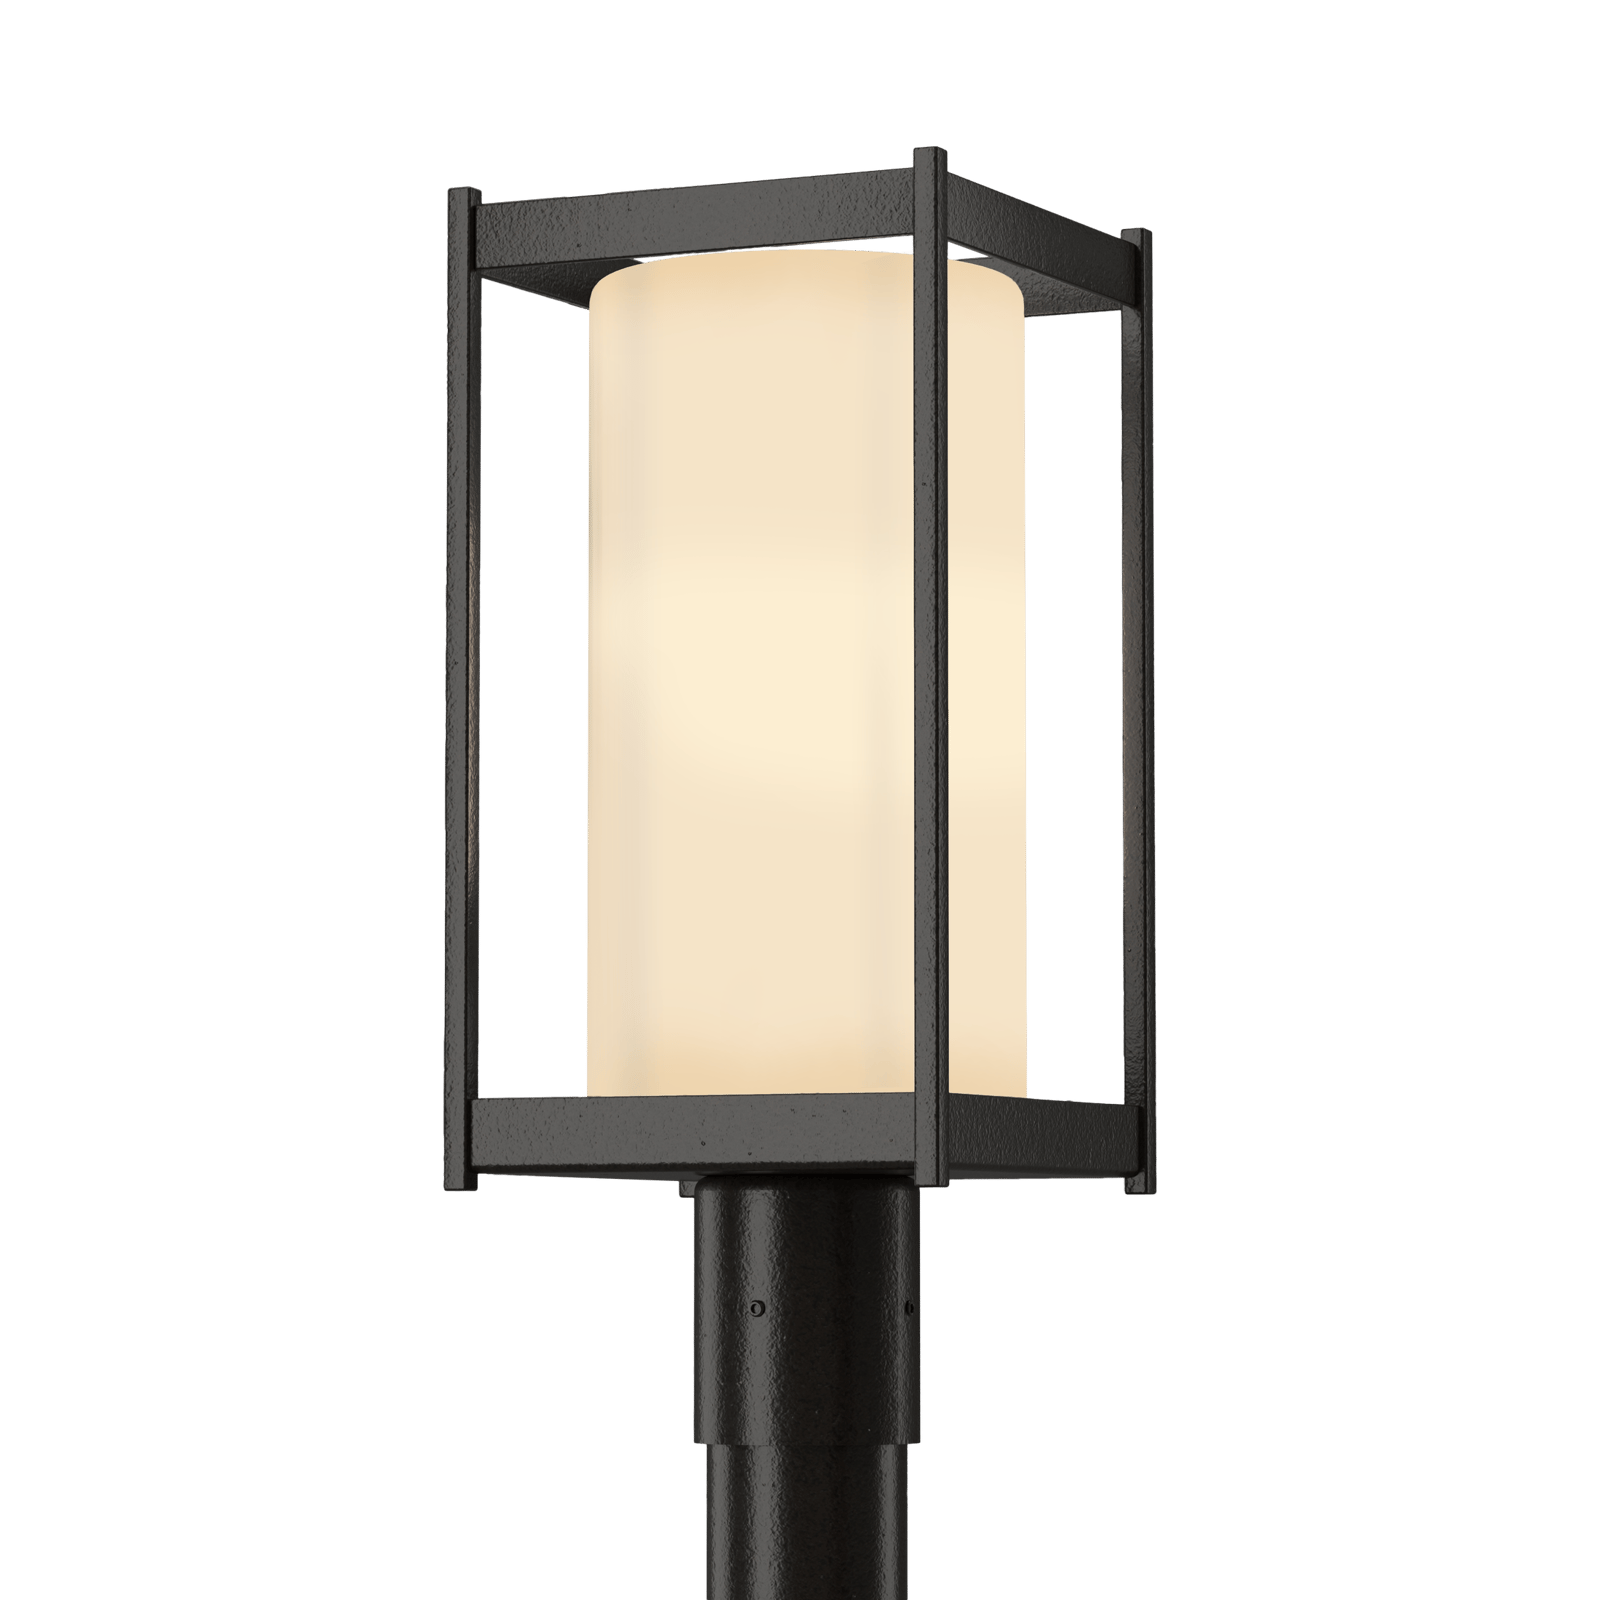 Hubbardton Forge Cela Outdoor Post Light Outdoor l Post/Pier Mounts Hubbardton Forge Coastal Oil Rubbed Bronze Opal Glass (GG) 